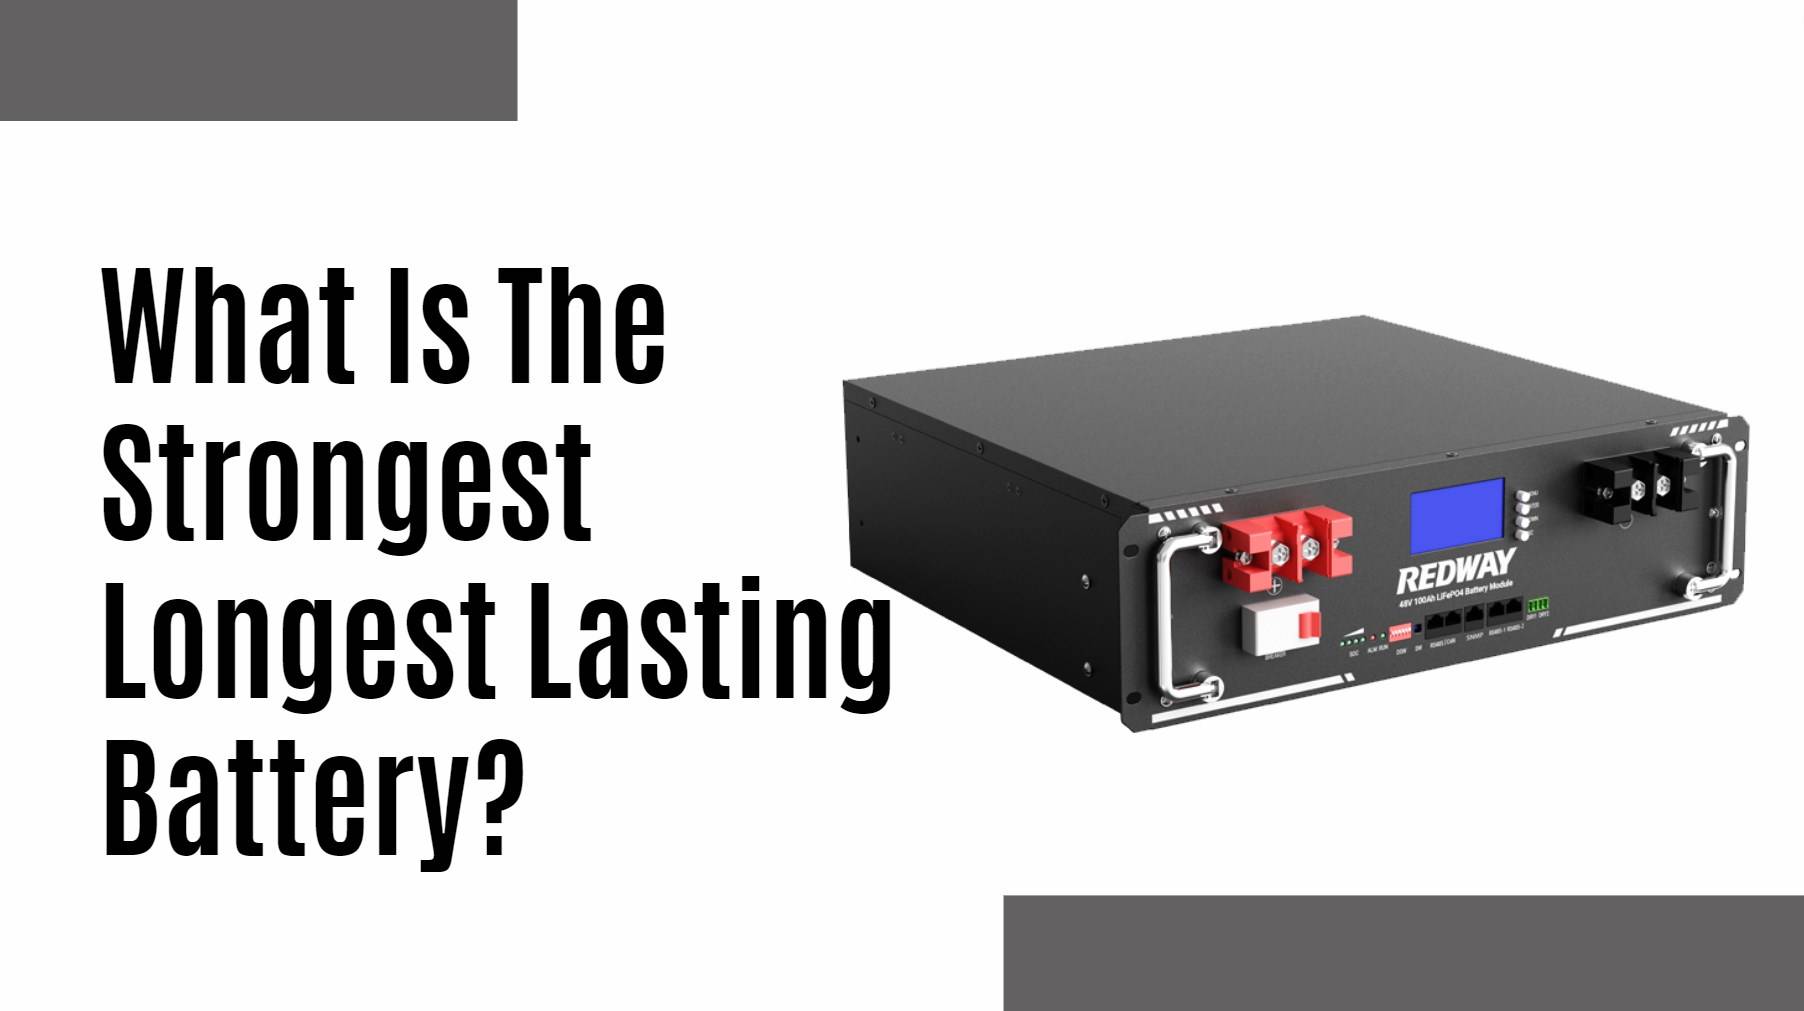 server rack battery factory manufacturer oem. What Is The Strongest Longest Lasting Battery?